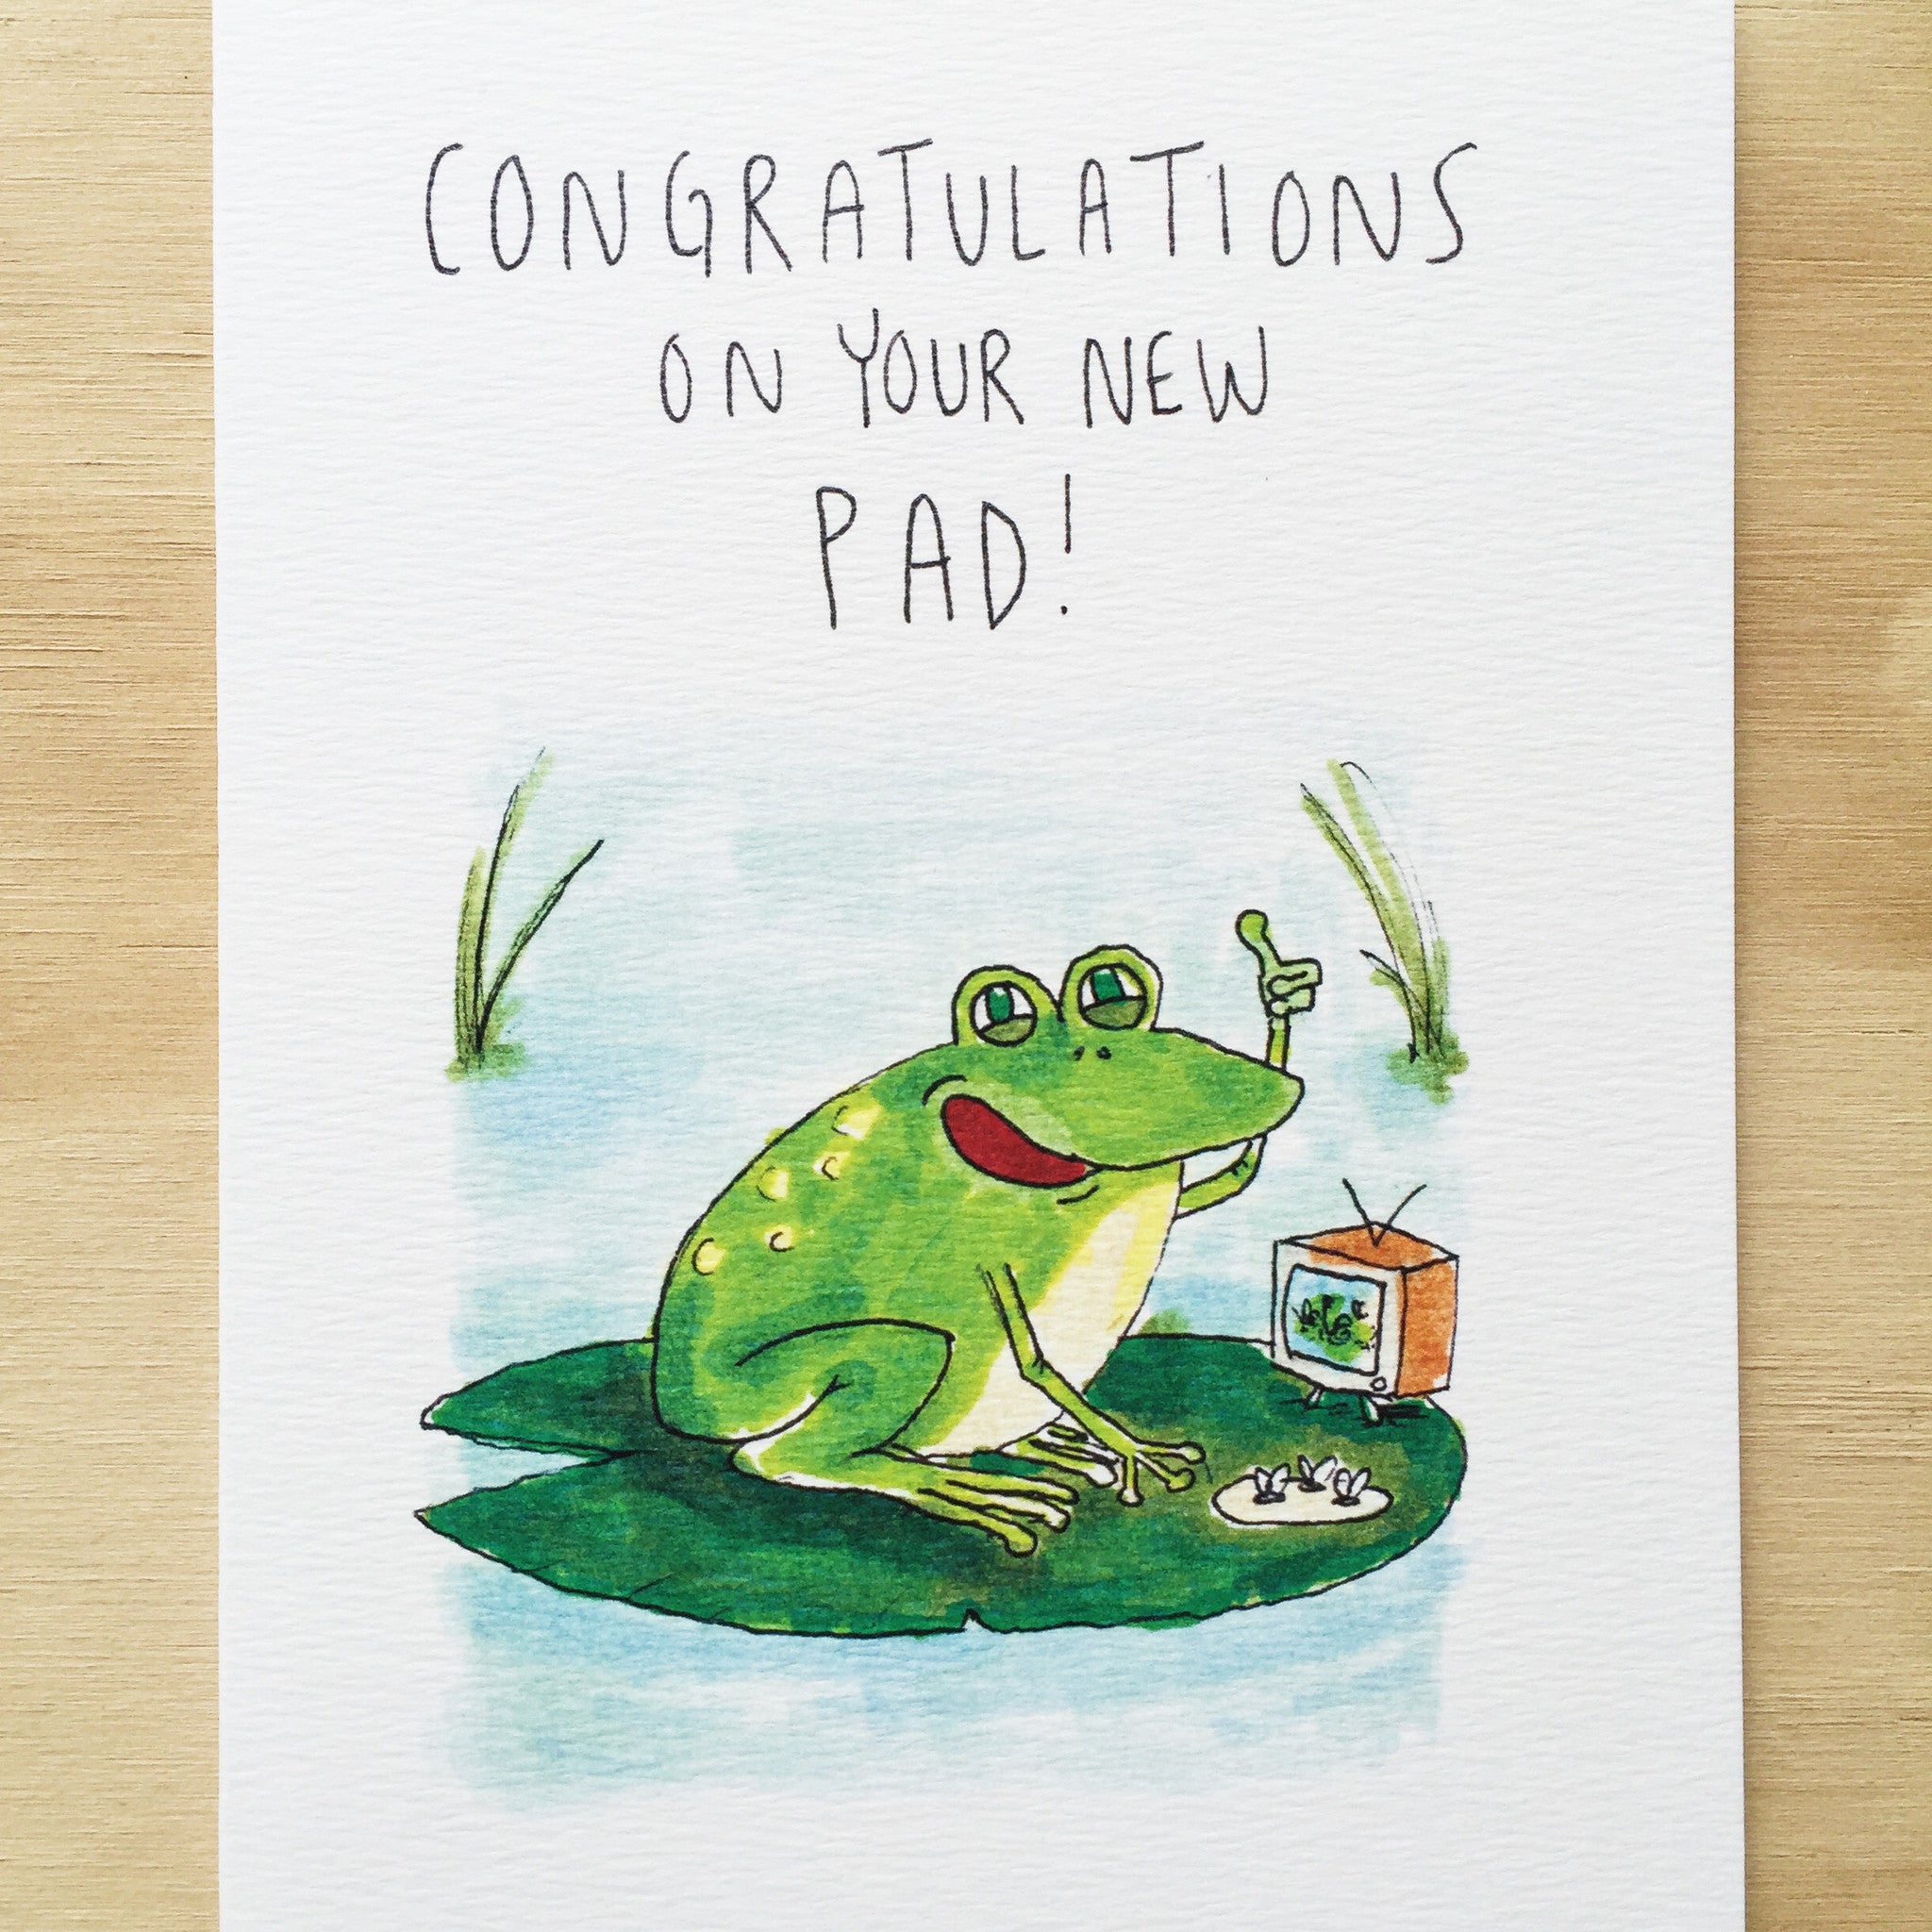 Congratulations On Your New Pad - Well Drawn